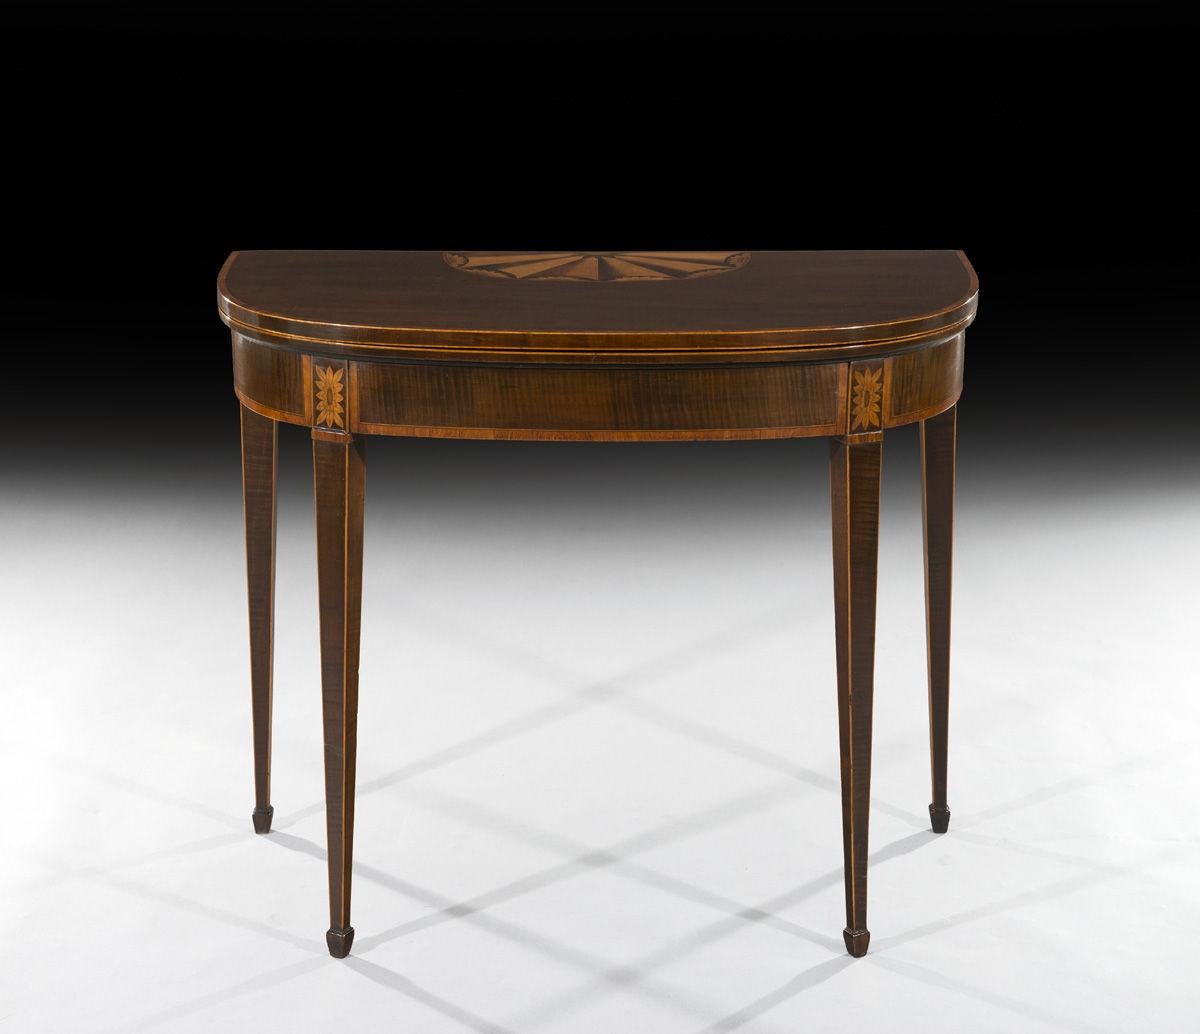 The D-shaped top is veneered in harewood, inlaid with a large fanned medallion and cross-banded in kingwood and the top opens to reveal a green baize playing surface which sits on a scissor-action gate leg support. The satinwood cross banded frieze